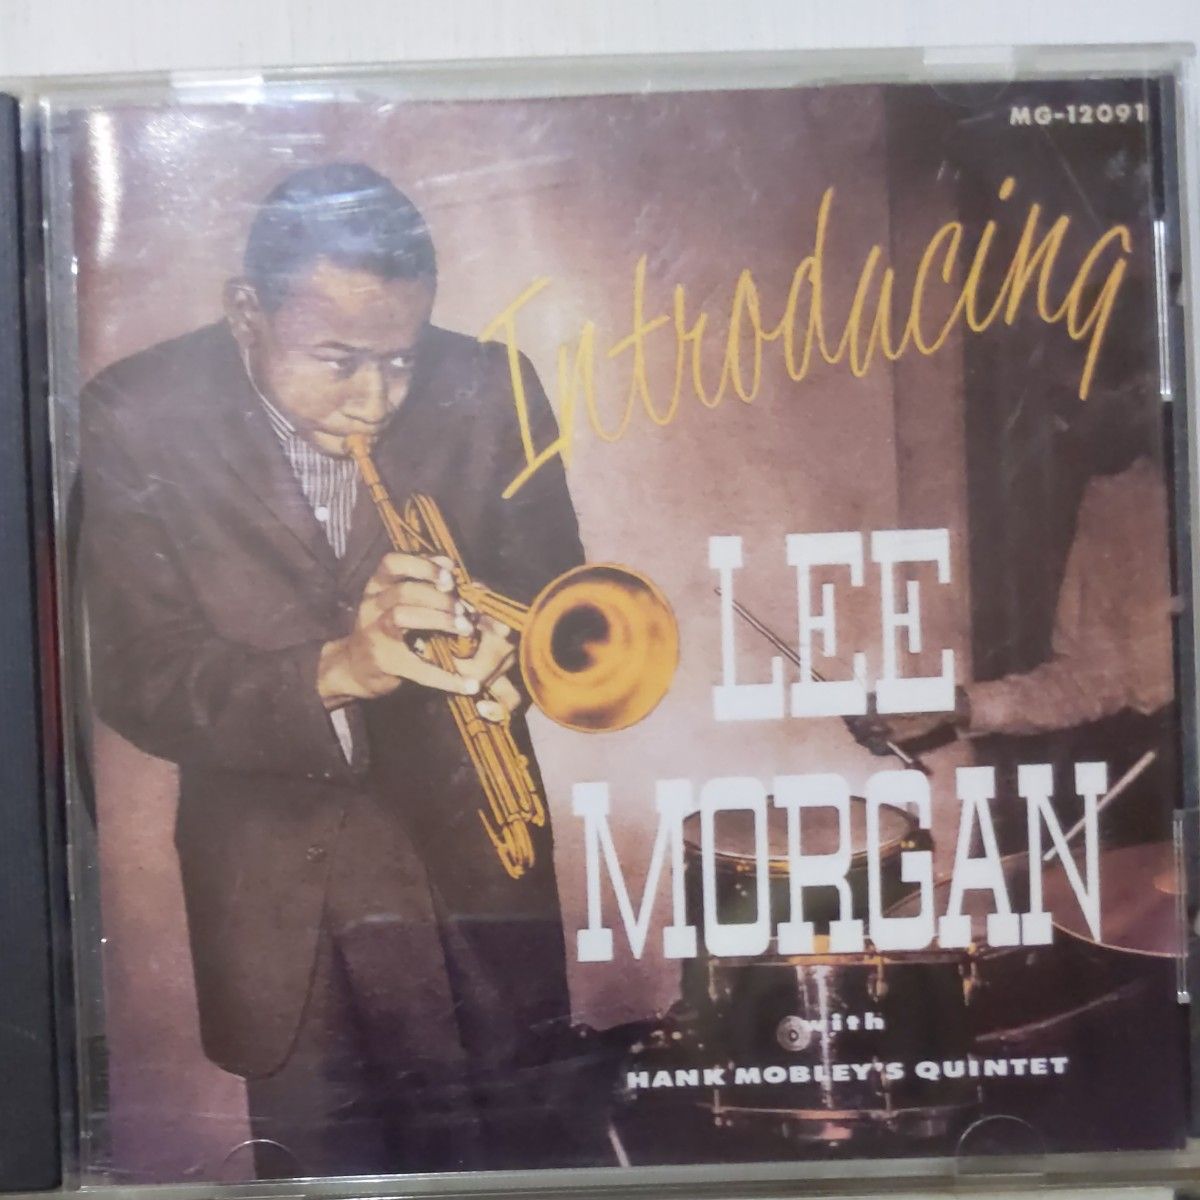 here's LEE MORGAN リーモーガン expoobident, introducing, candy CD 4枚セット